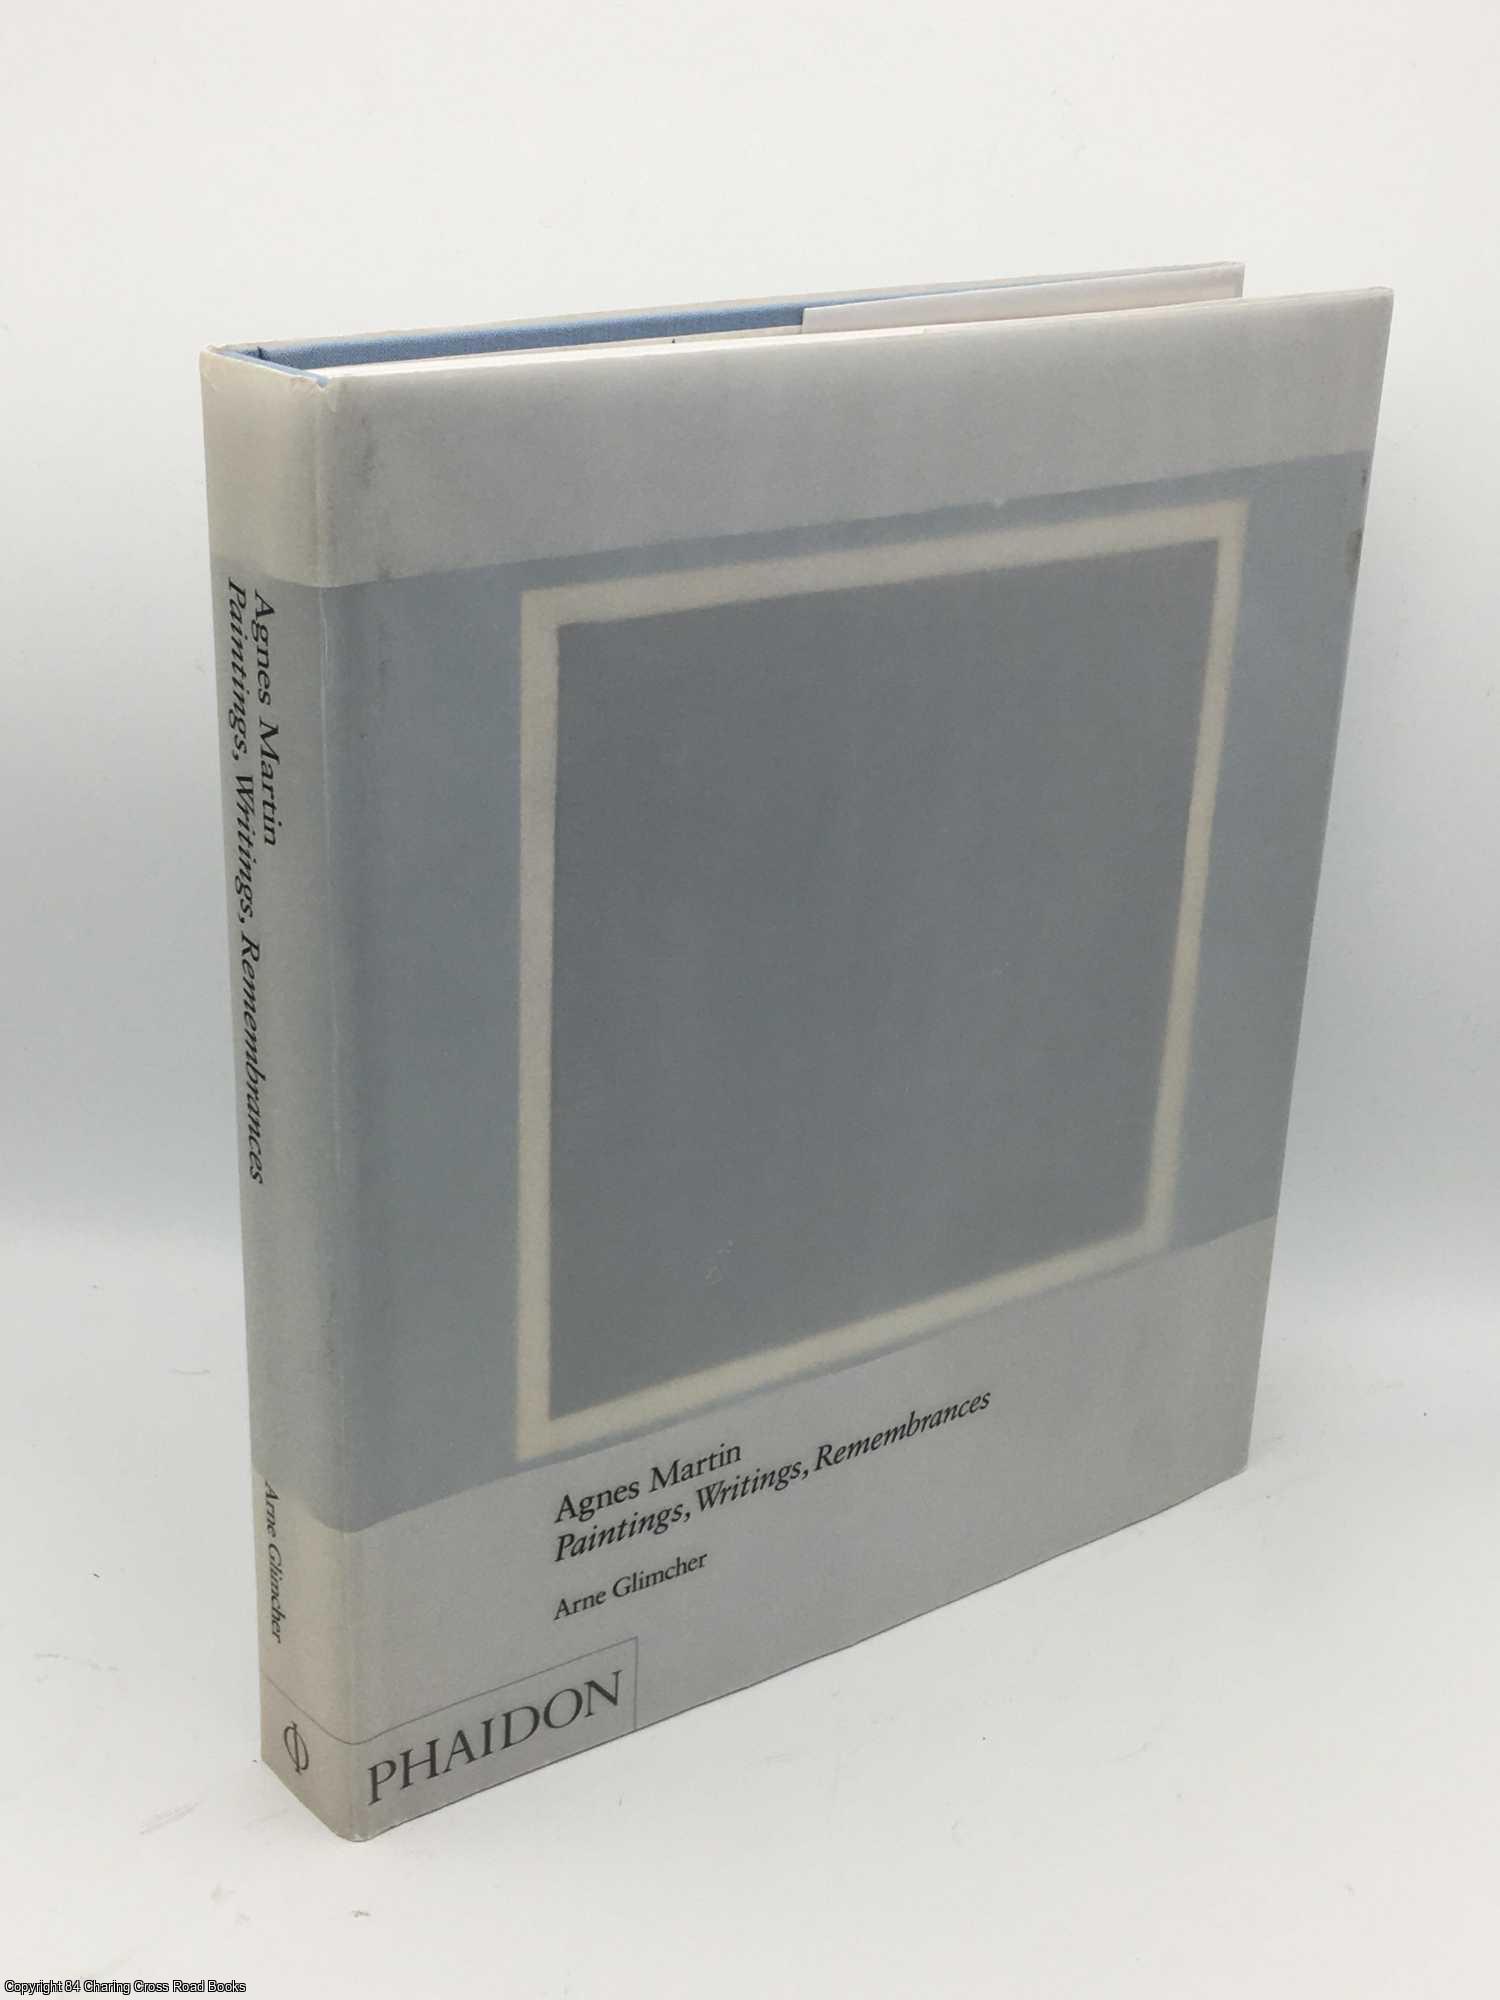 Glimcher, Arne - Agnes Martin: Paintings, Writings, Remembrances